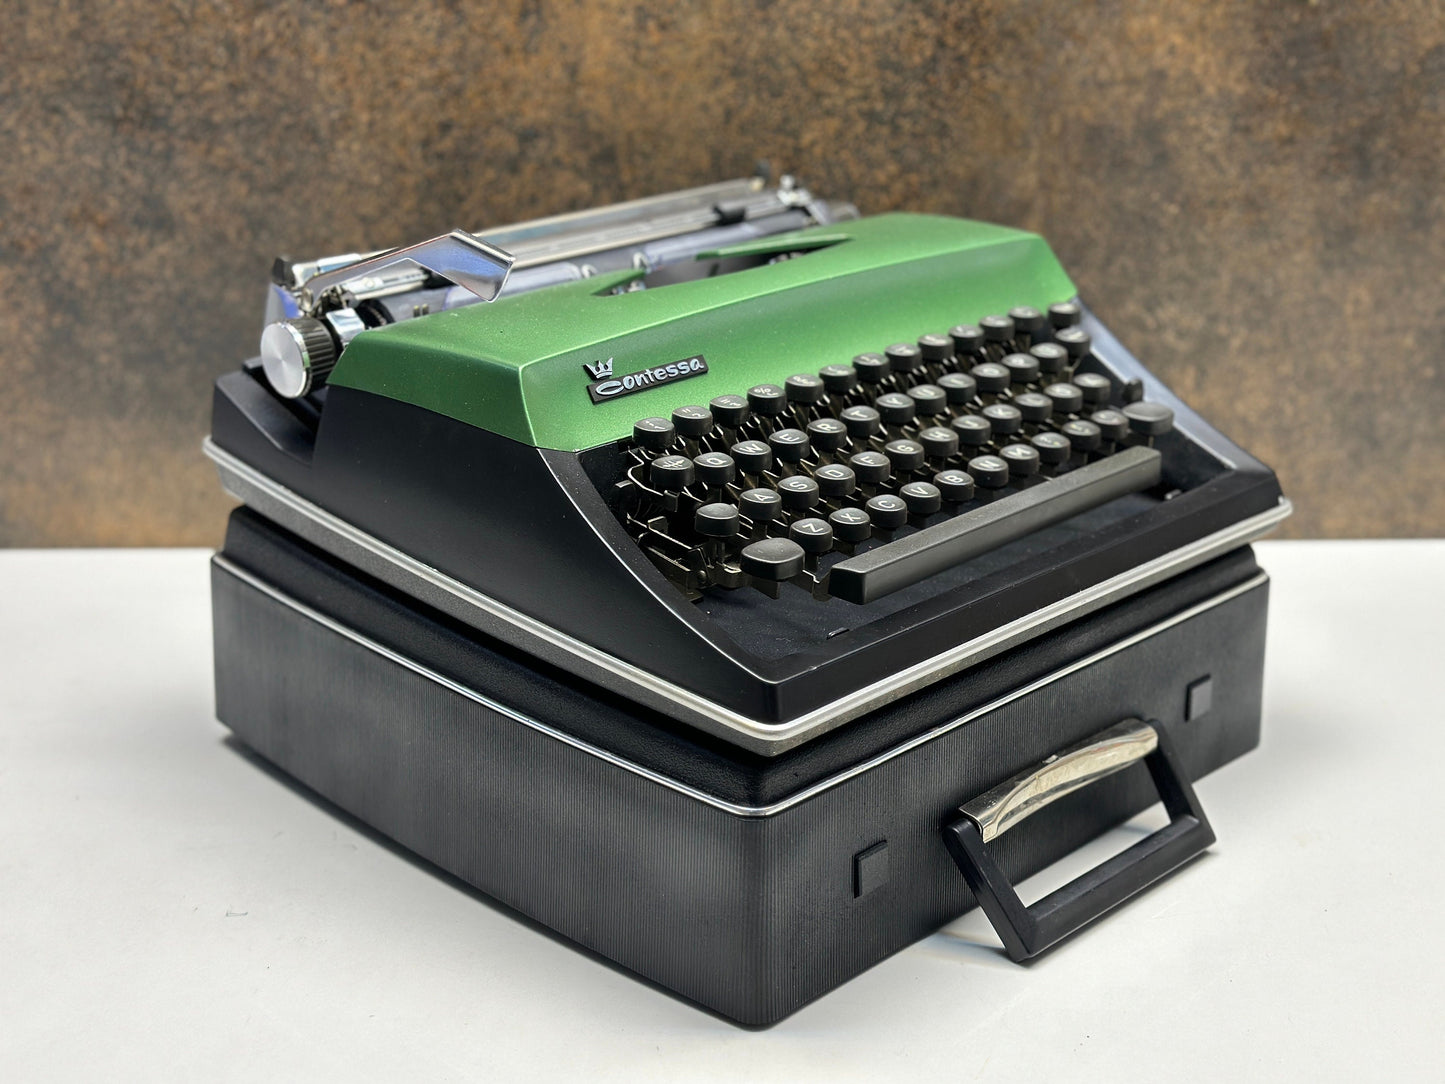 Qwerty Adler Contessa Deluxe Typewriter - Retro Design - Fully Functional - Classic Office Accessory / Black Typewriter